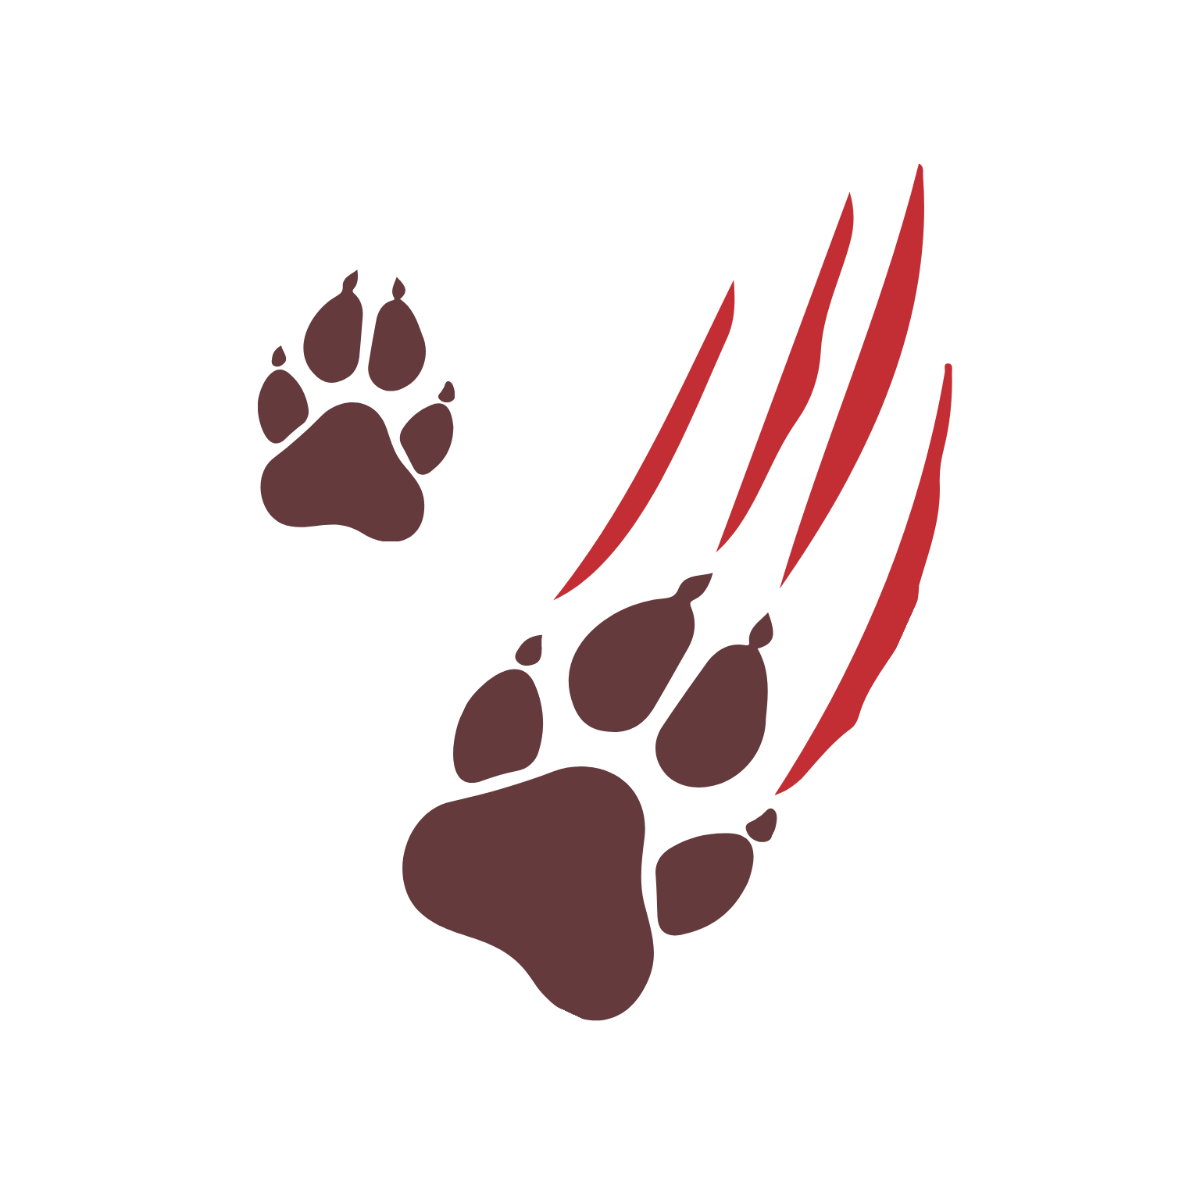 Pet Paw PSD, 3,000+ High Quality Free PSD Templates for Download